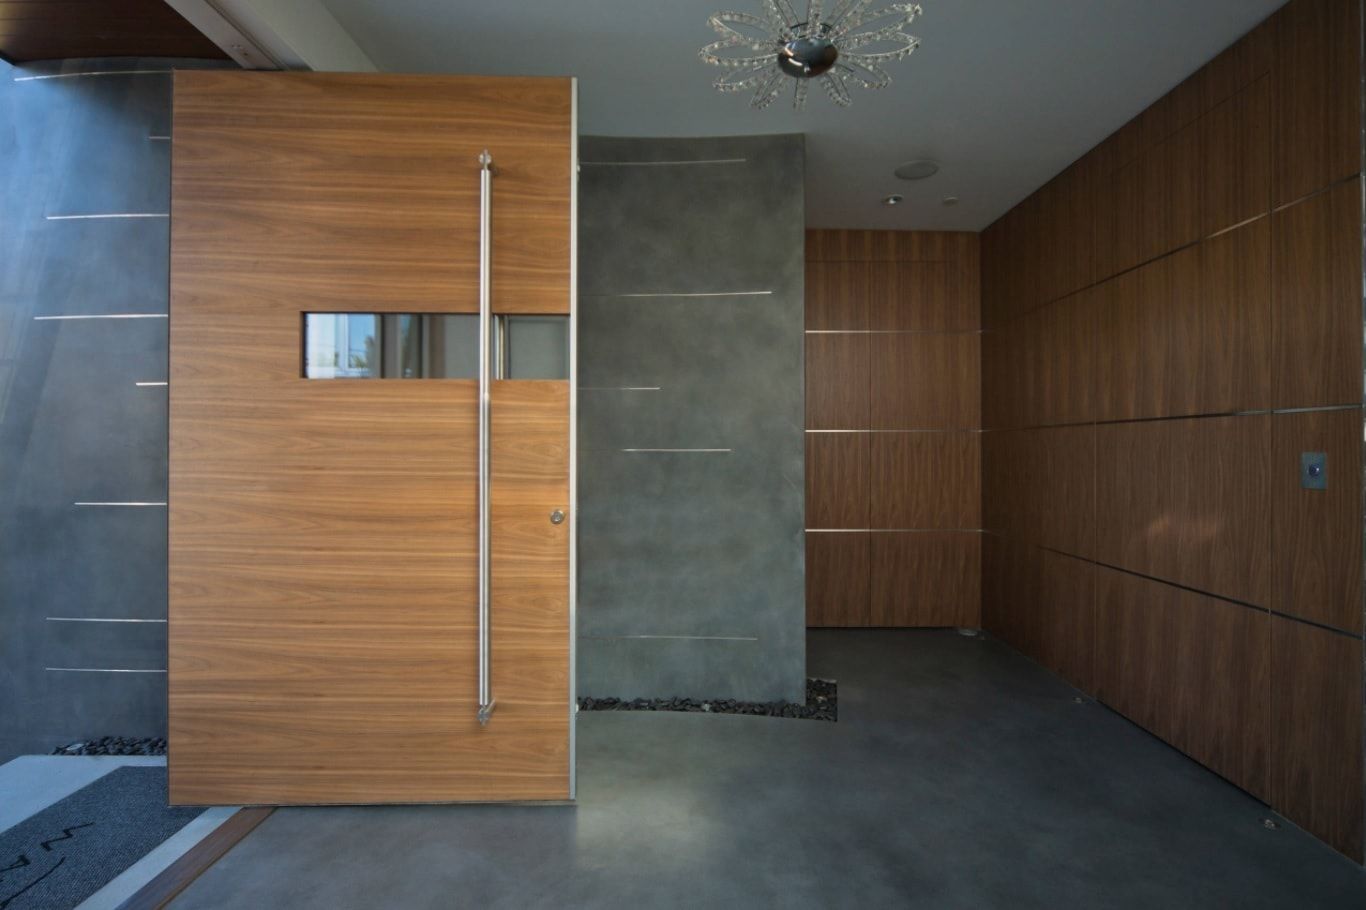 Sliding wooden doors in the HI-tech interior with concrete finished walls